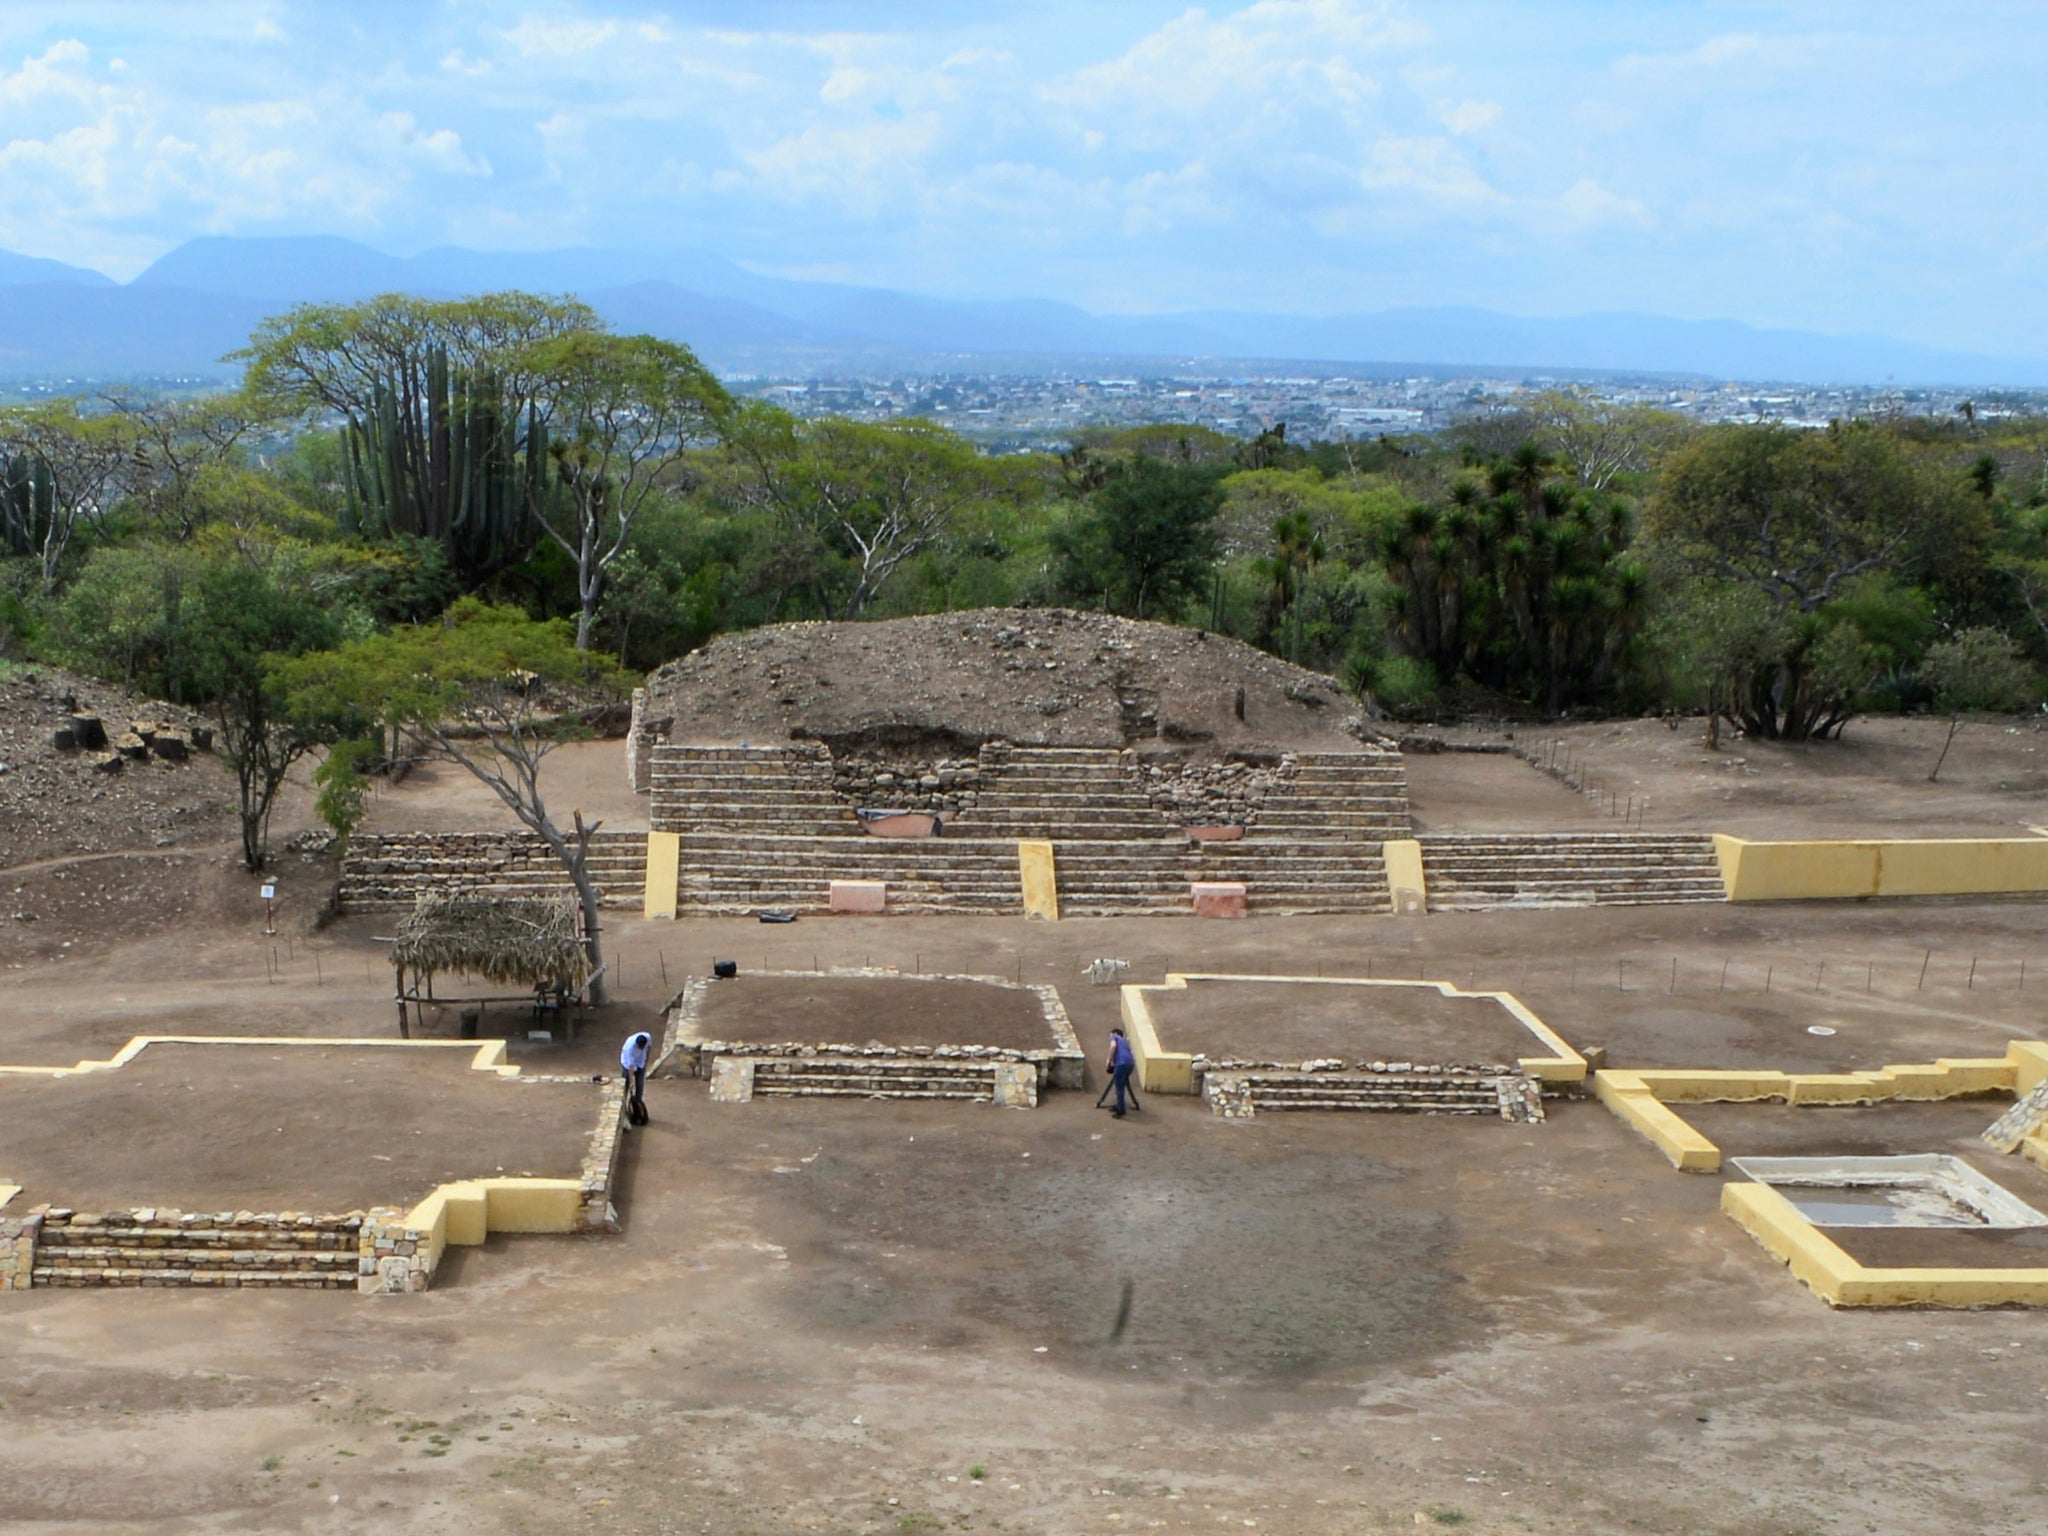 The Tehuacan archaeological site in Tehuacan, Puebla state, Mexico, where archaeologist have identified the first known temple to the Flayed Lord